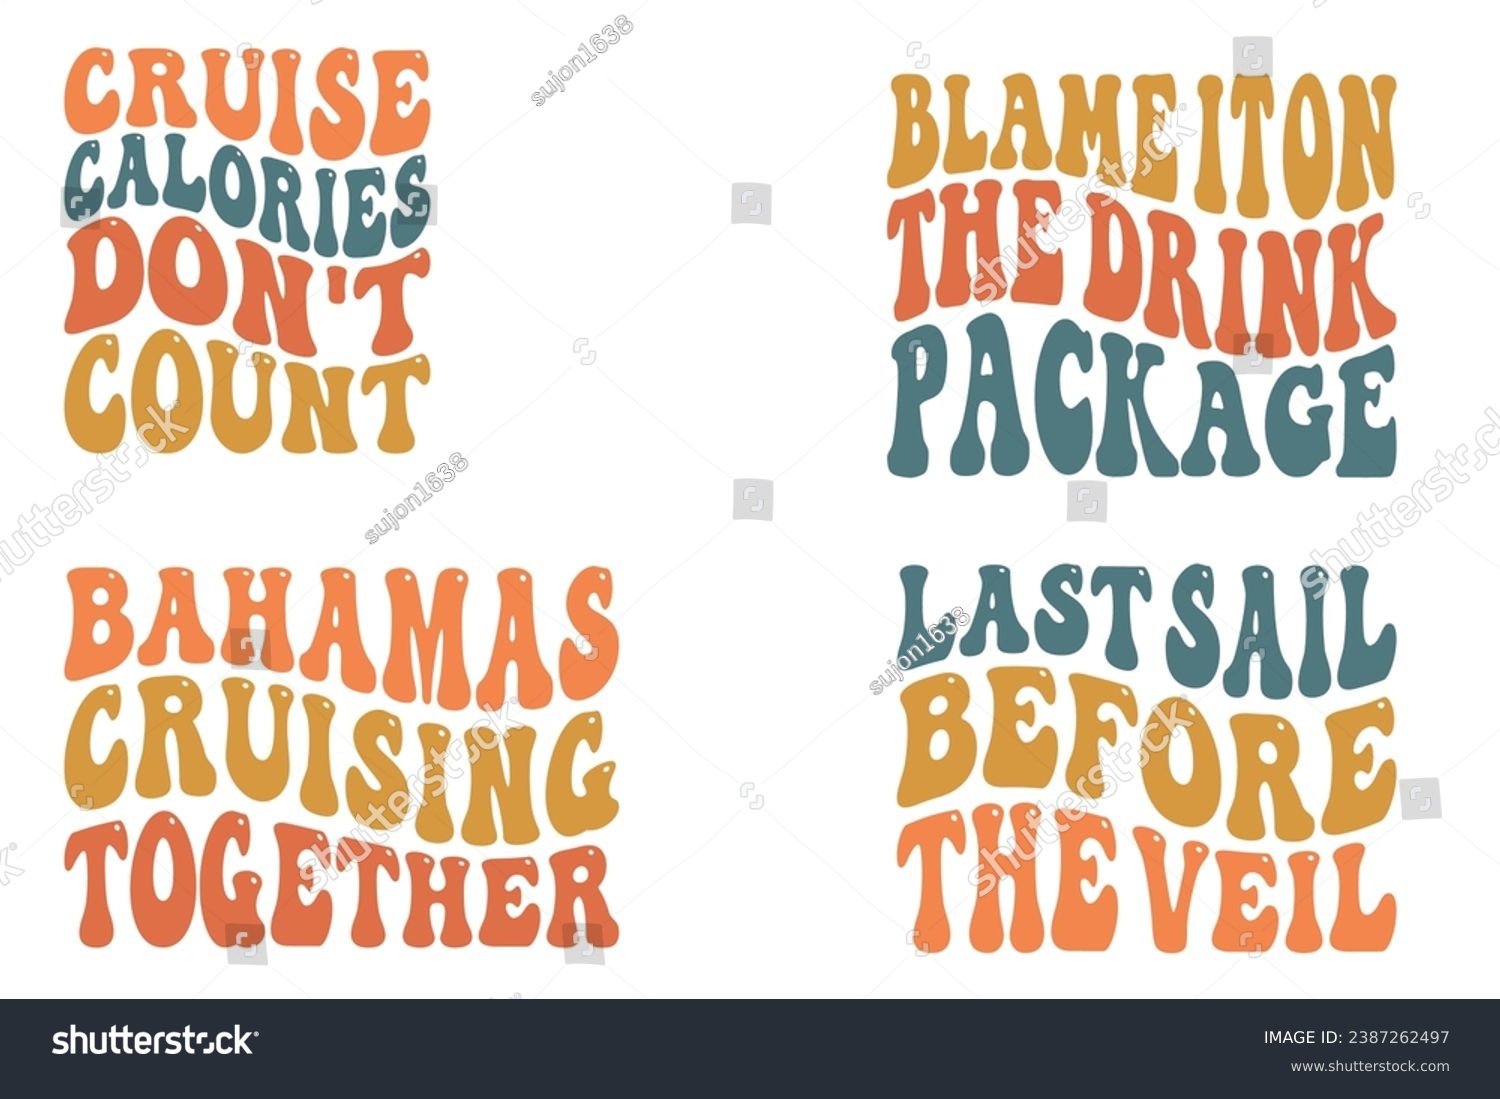 SVG of  Cruise Calories Don't Count, Blame It On The Drink Package, Bahamas cruising together, Last Sail Before The Veil retro wavy T-shirt designs svg